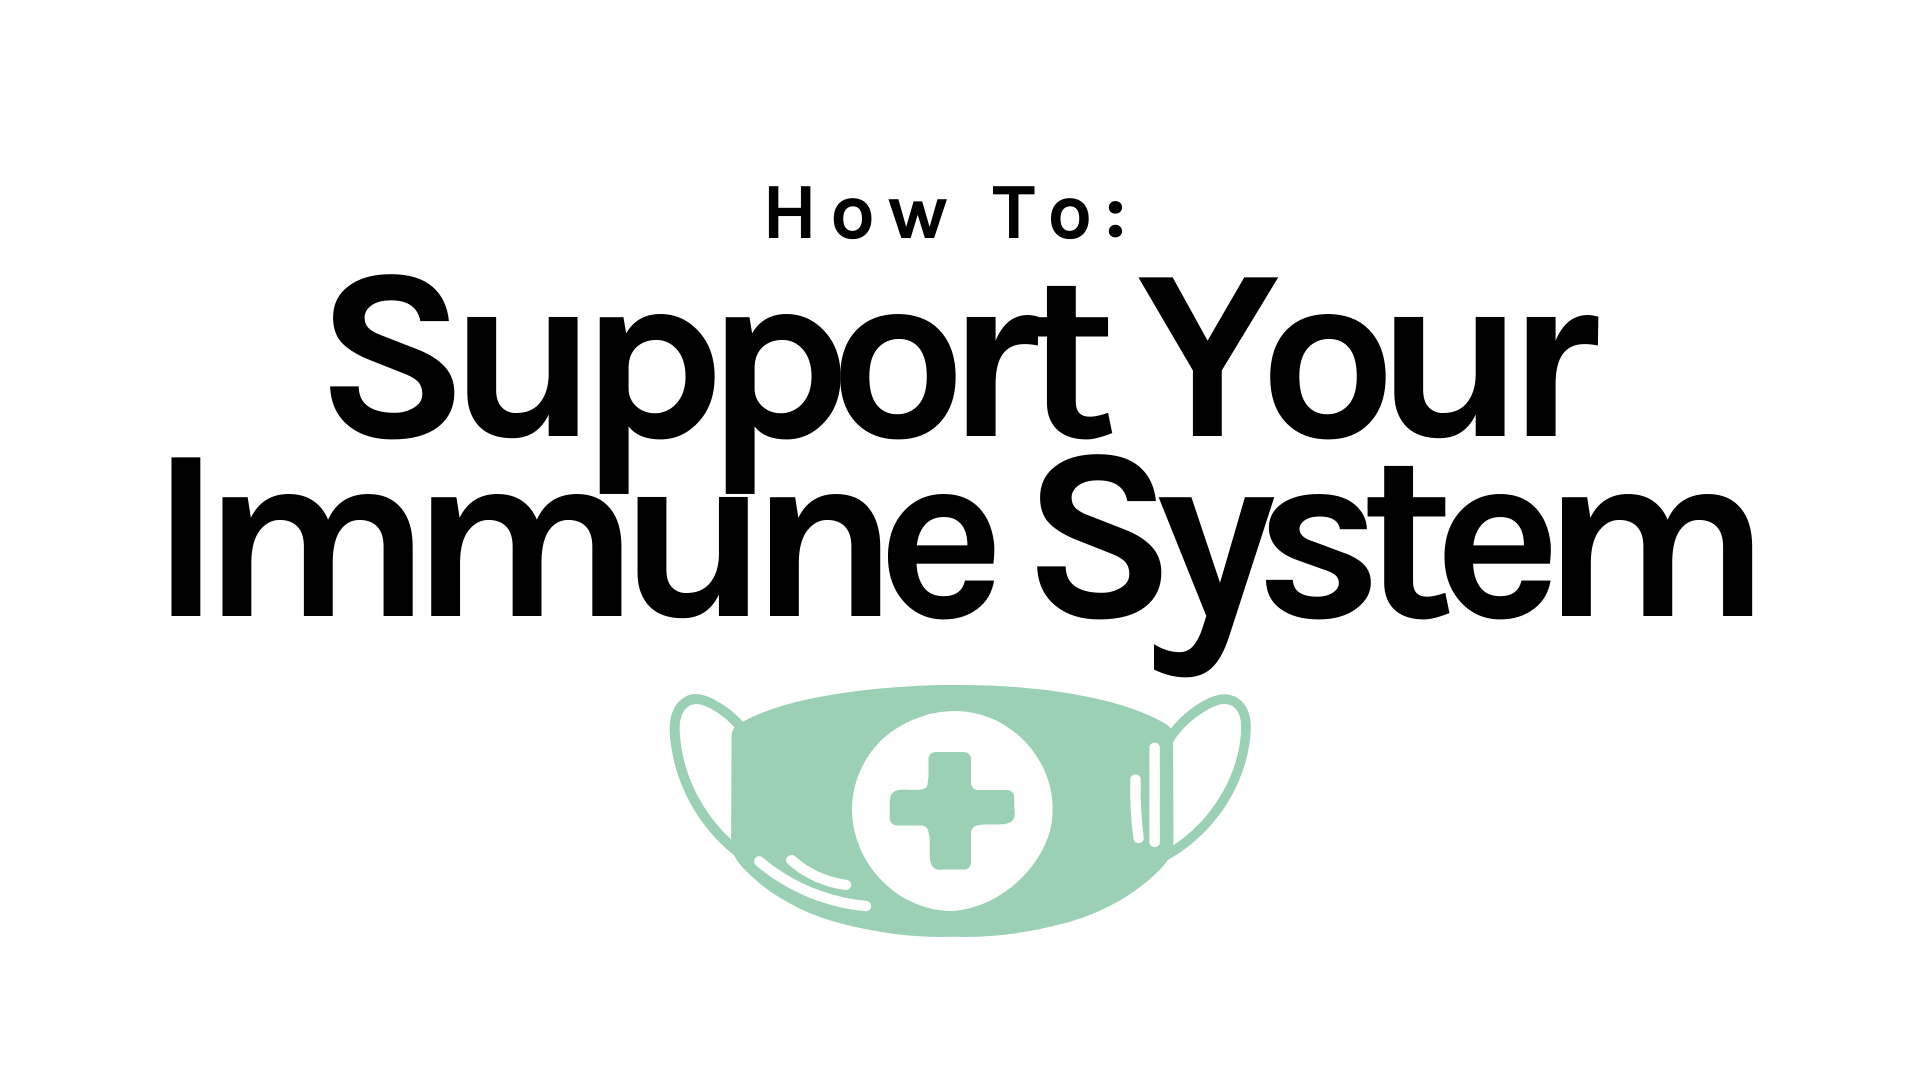 How To: Support Your Immune System